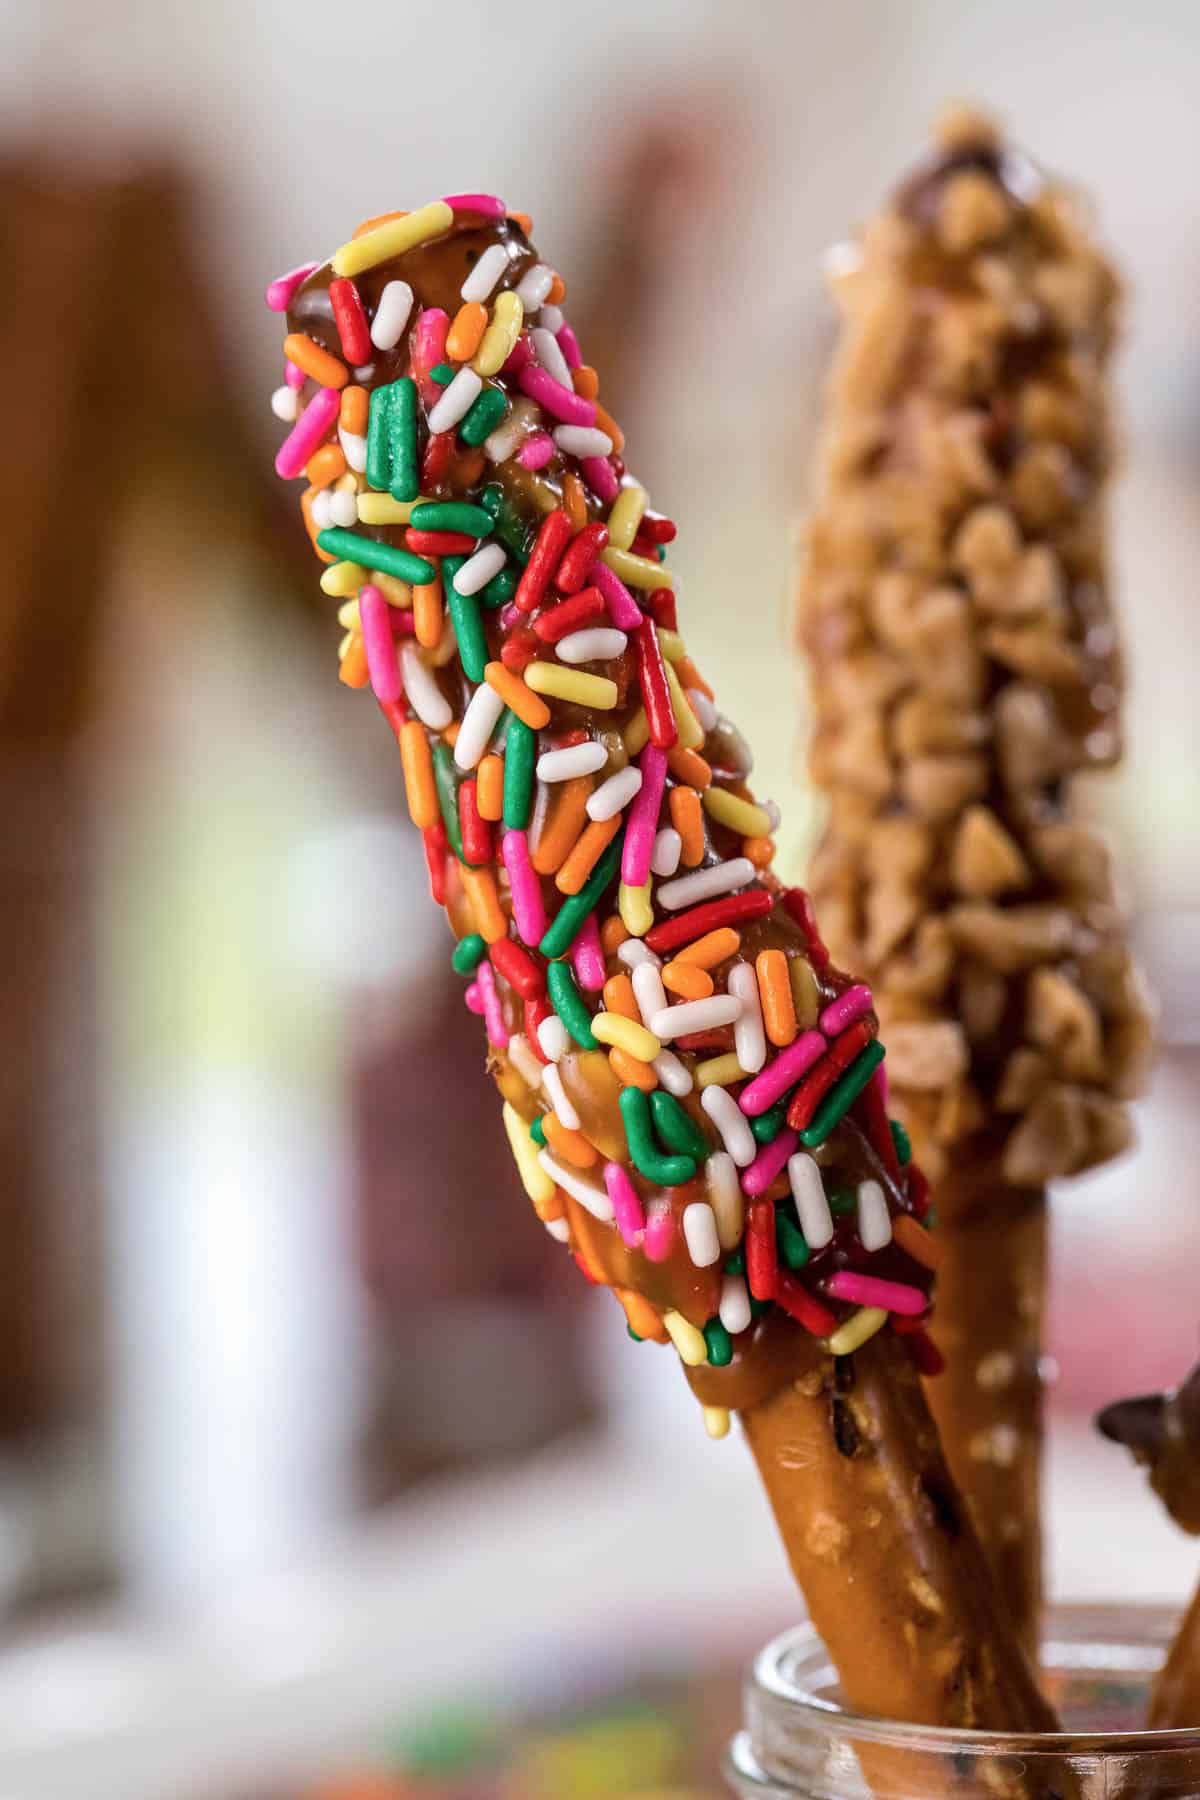 pretzel rods dipped in caramel with various toppings